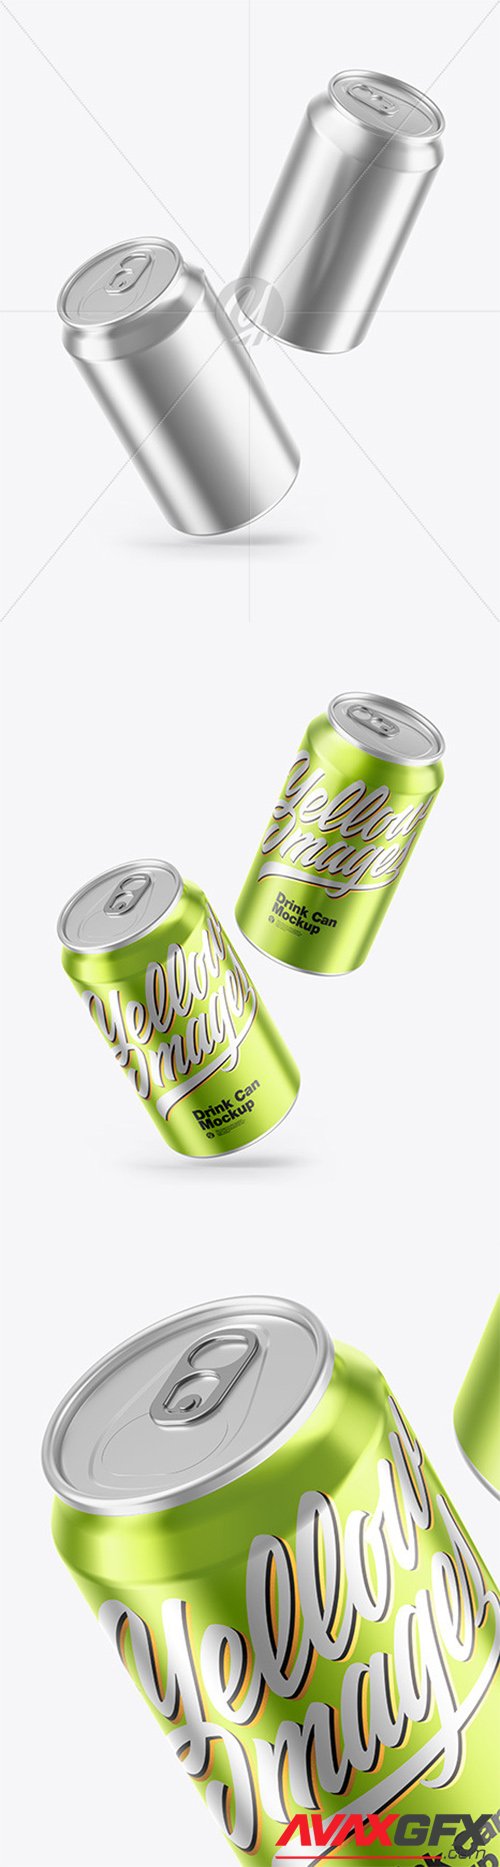 Download Download Metallic Drink Can With Glossy Finish And Condensation Png Yellowimages Mockups